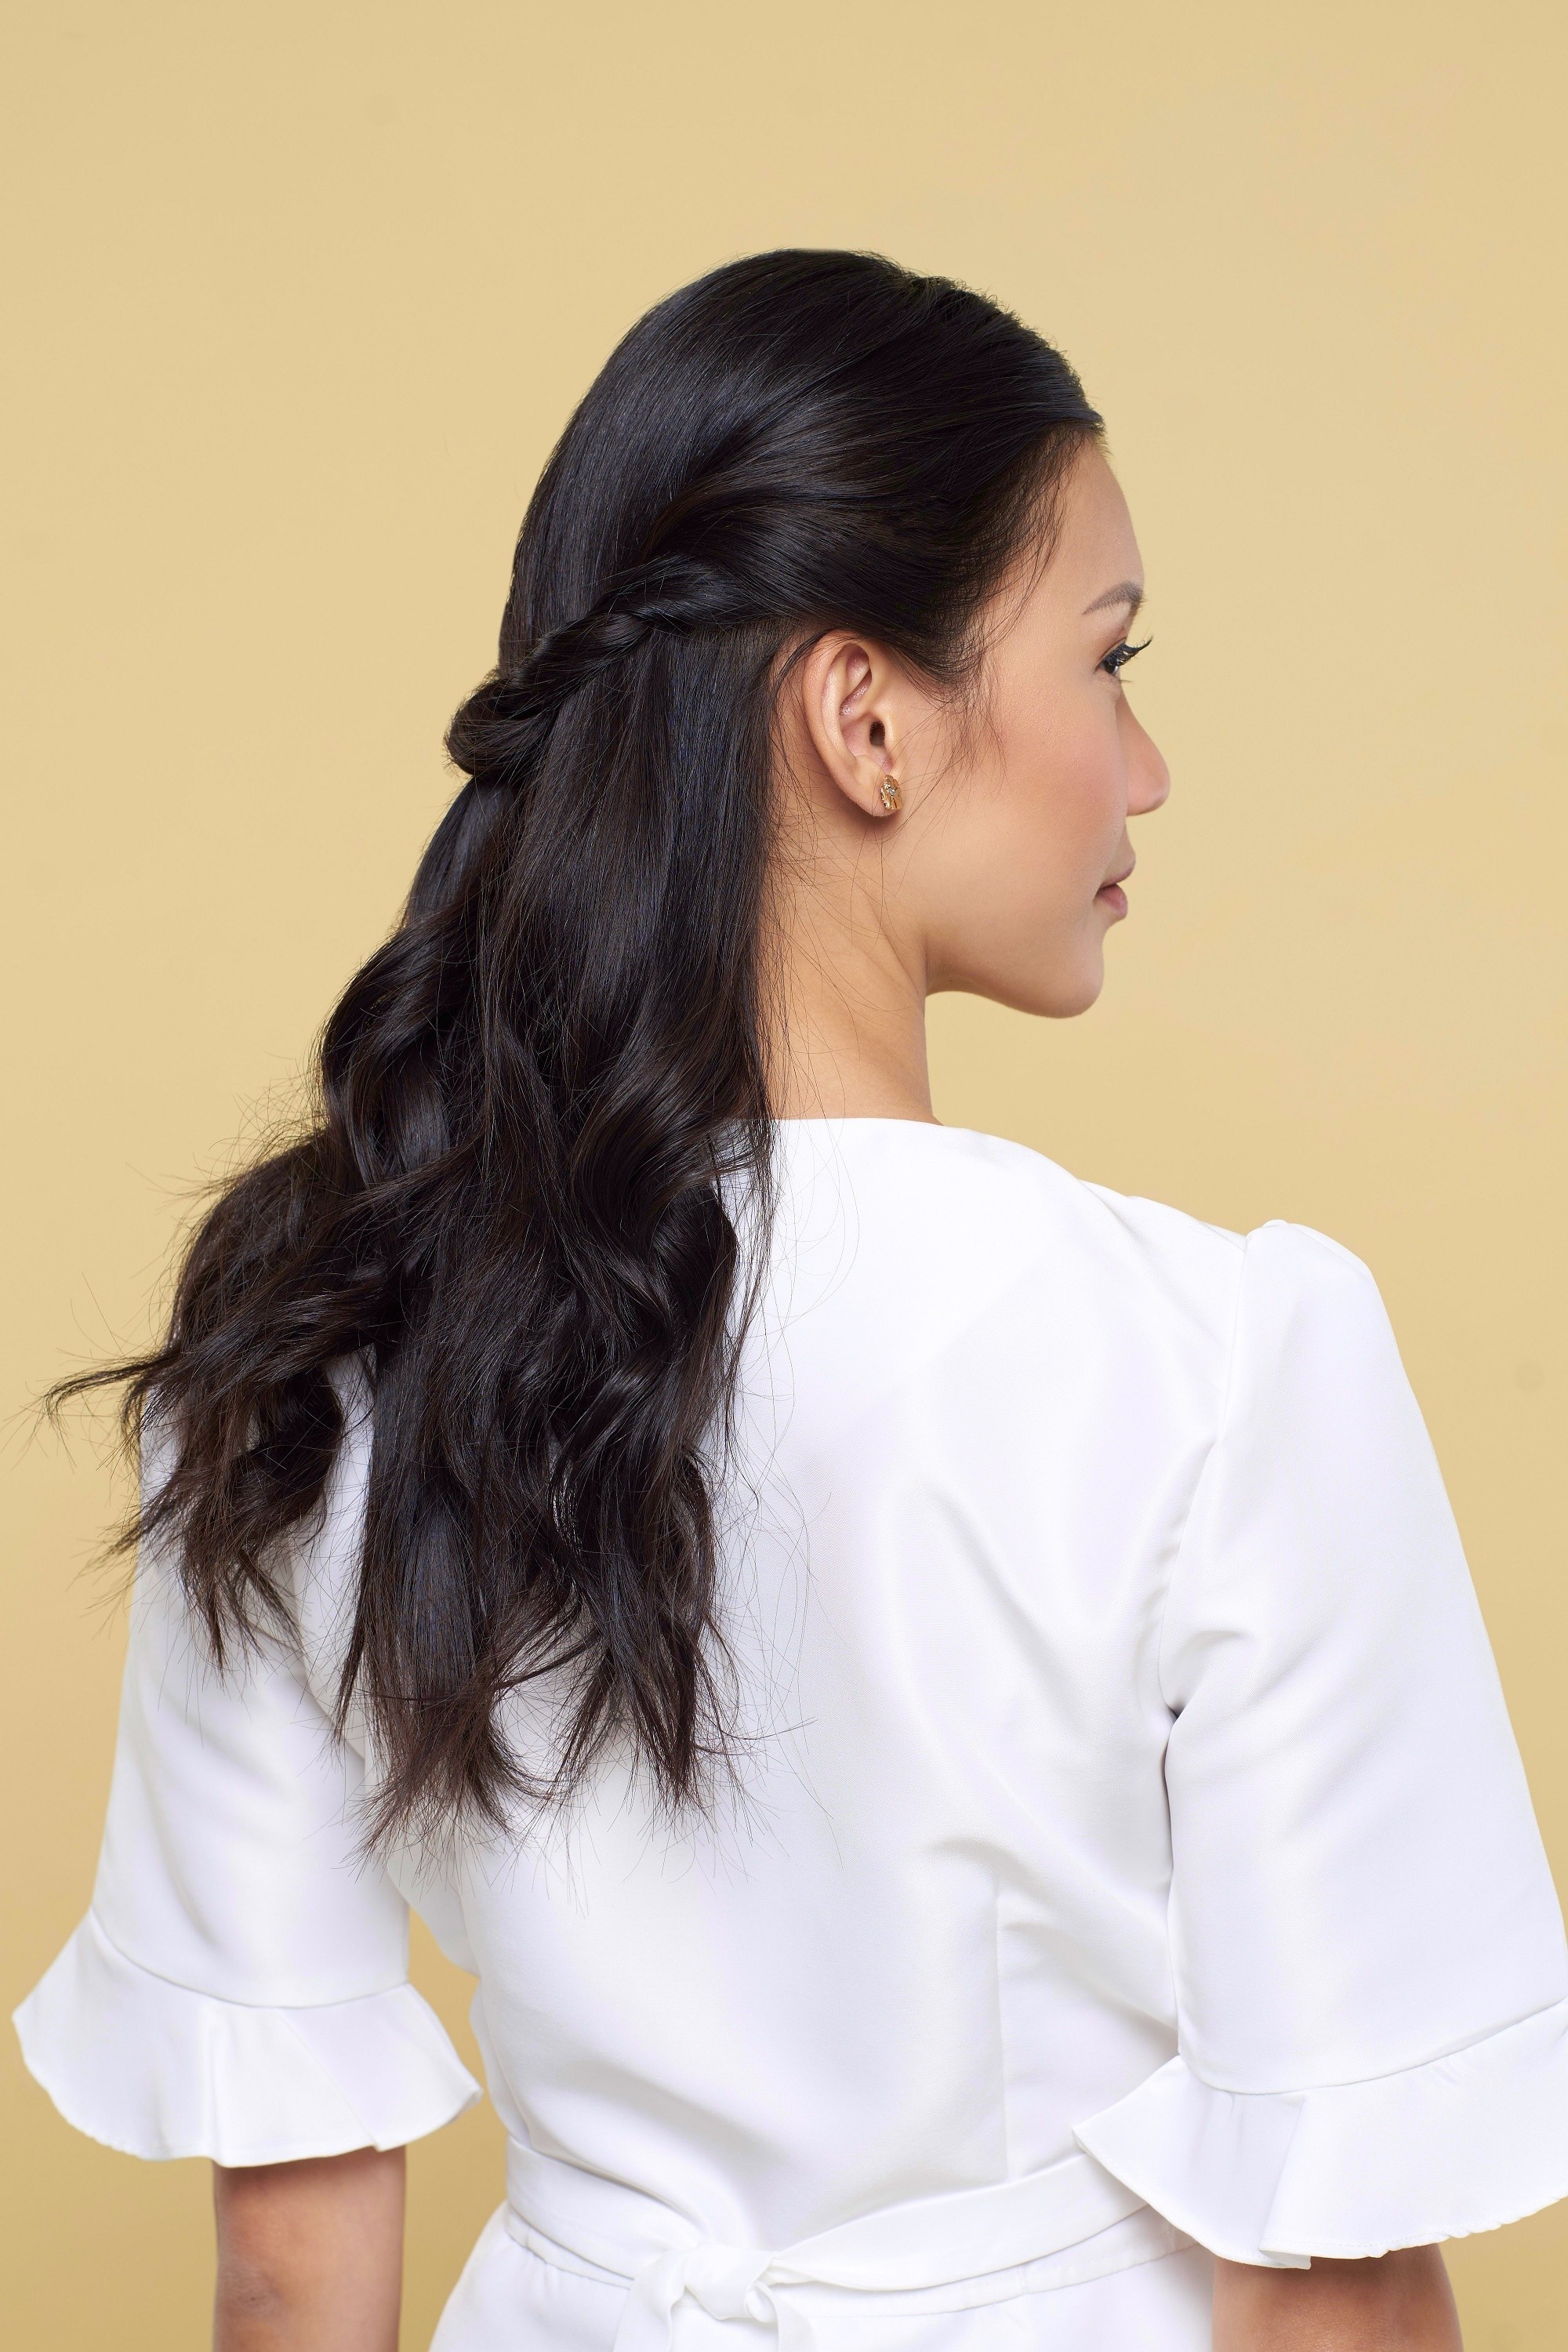 Valentine hairstyles: Back shot of an Asian woman with long black hair in half updo wearing a white blouse